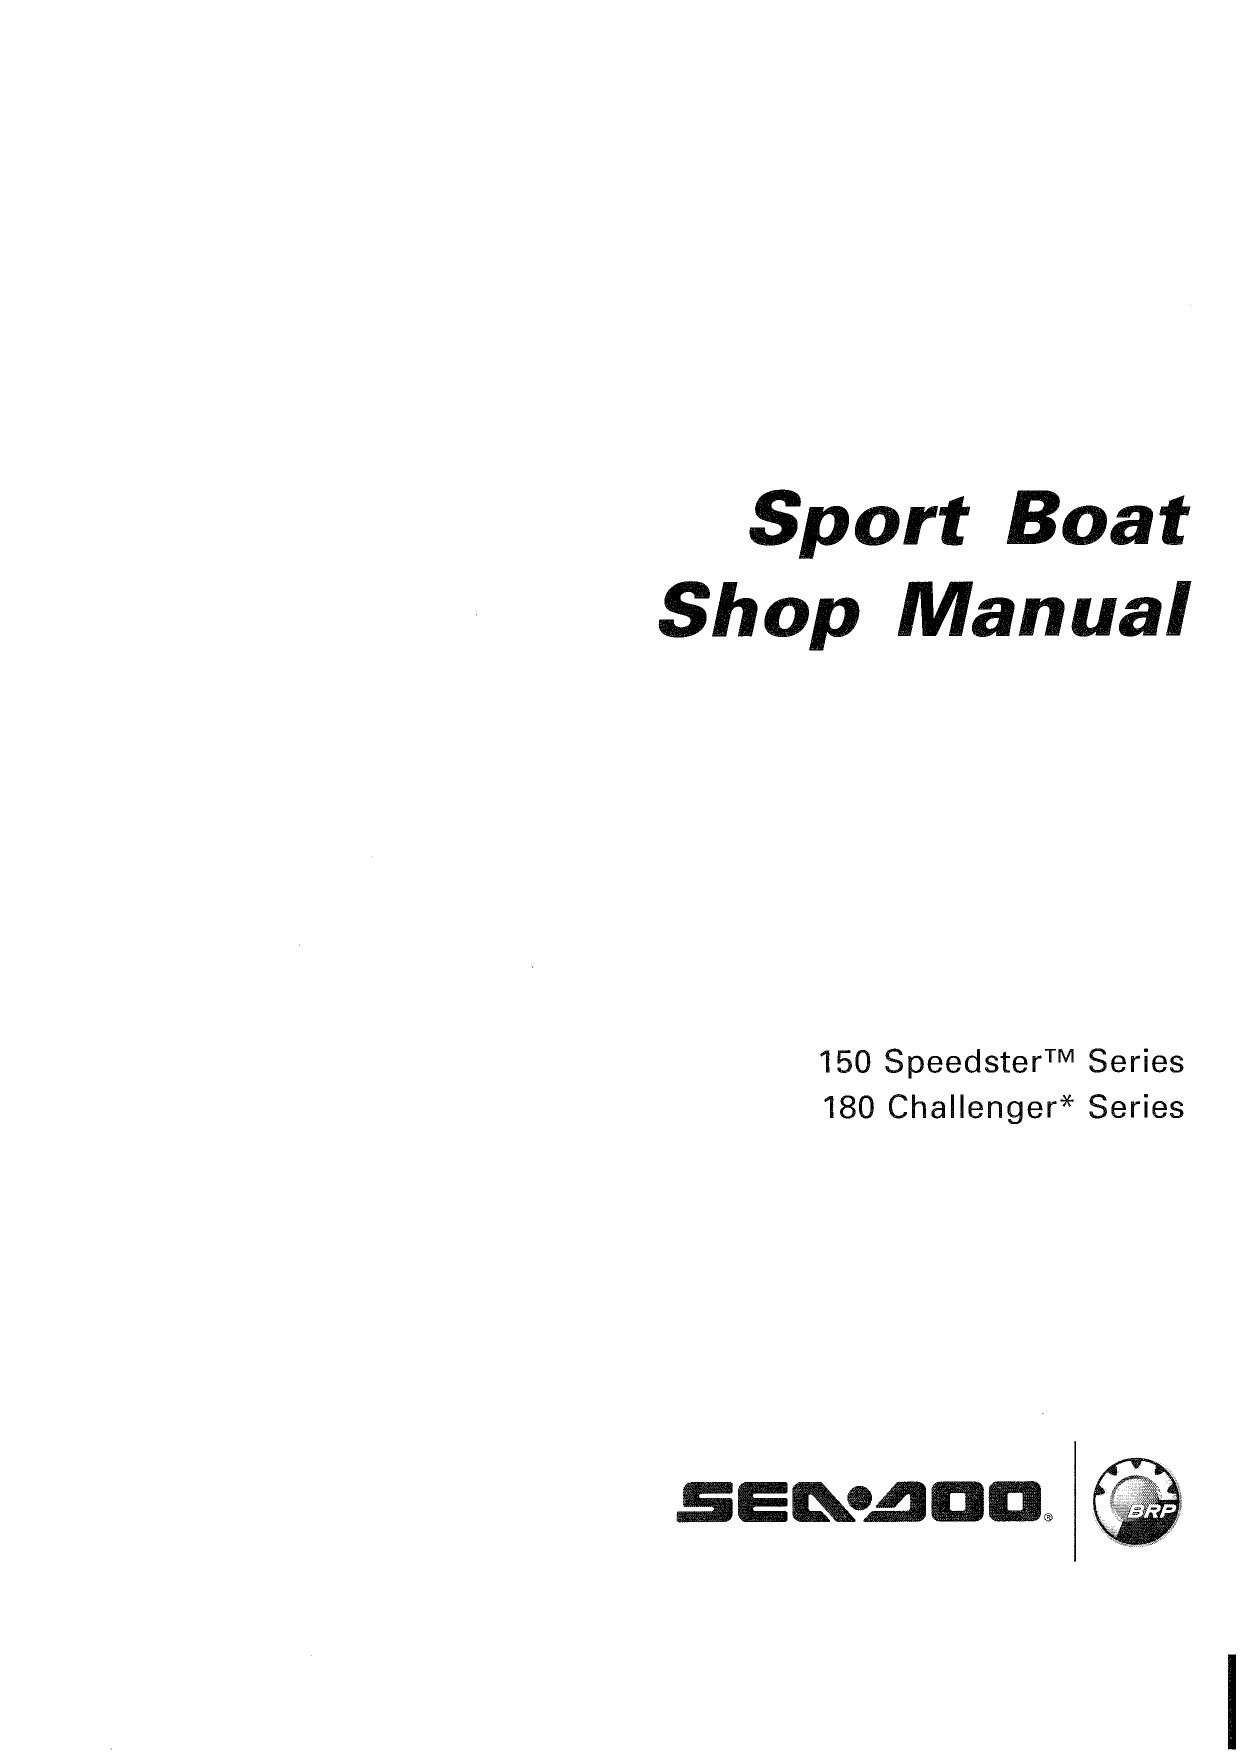 2007-2008 Bombardier 150 speedster/180-230 challenger/230 wake series Sea-Doo all models manual Preview image 2